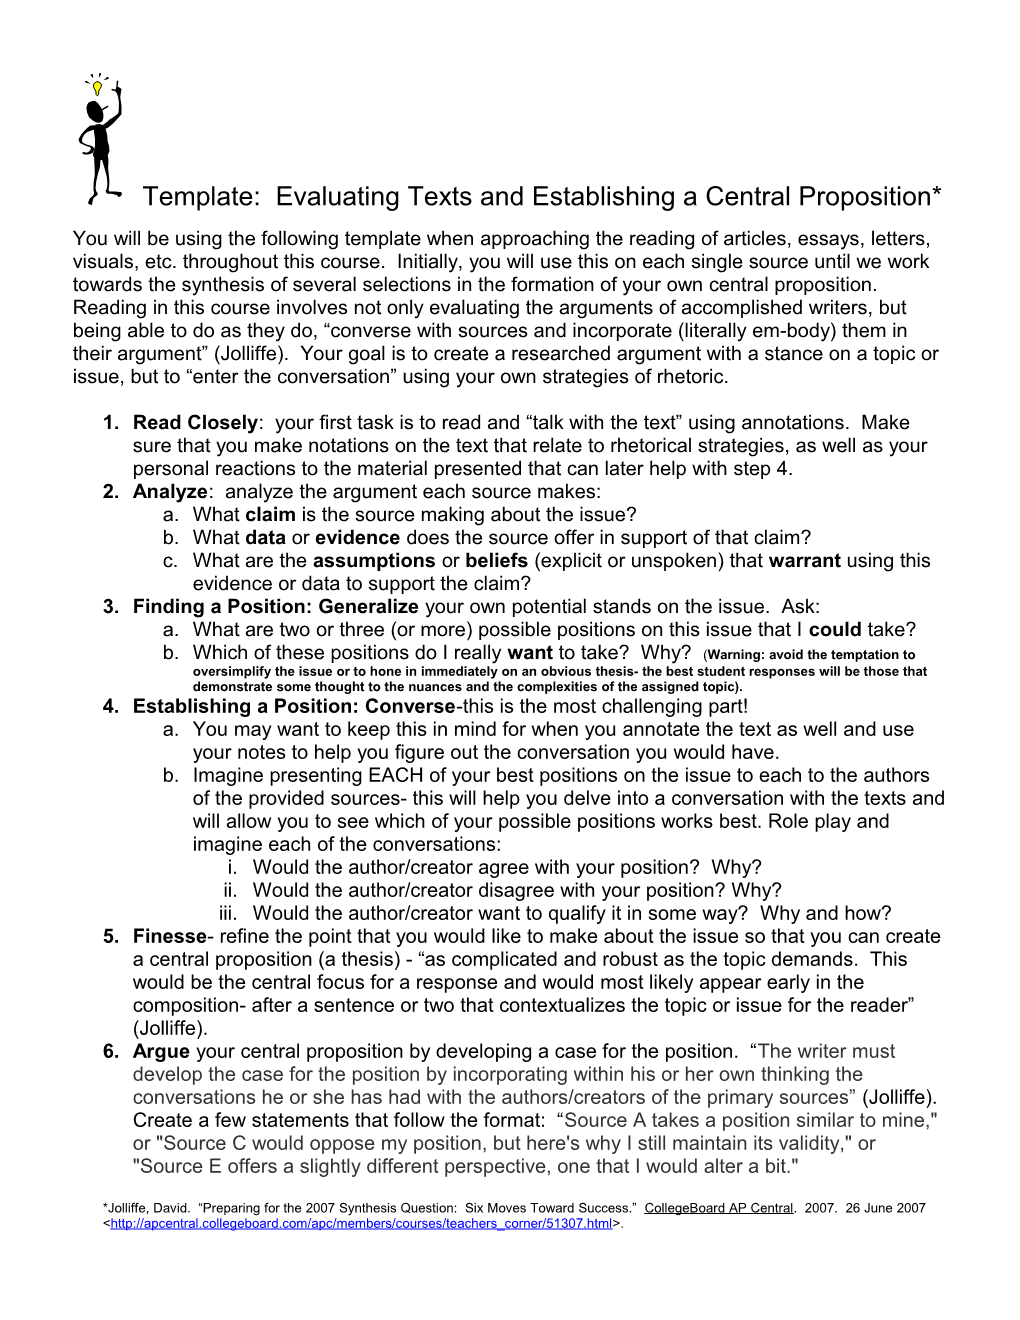 Template: Evaluating Texts and Establishing a Central Proposition*